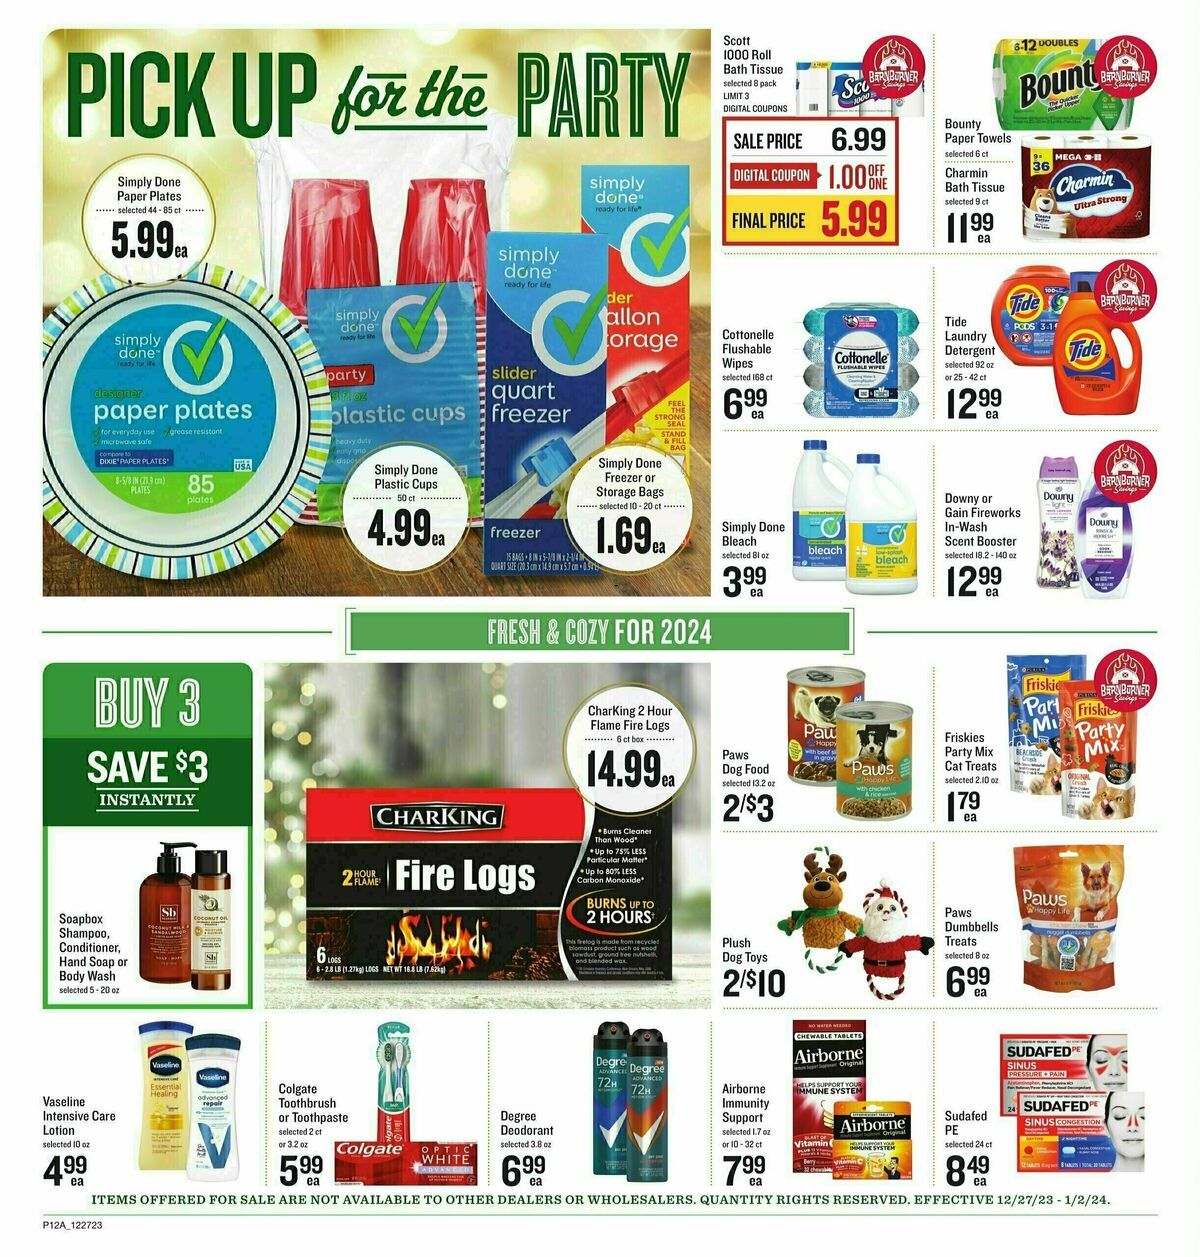 Lowes Foods Weekly Ad from December 27